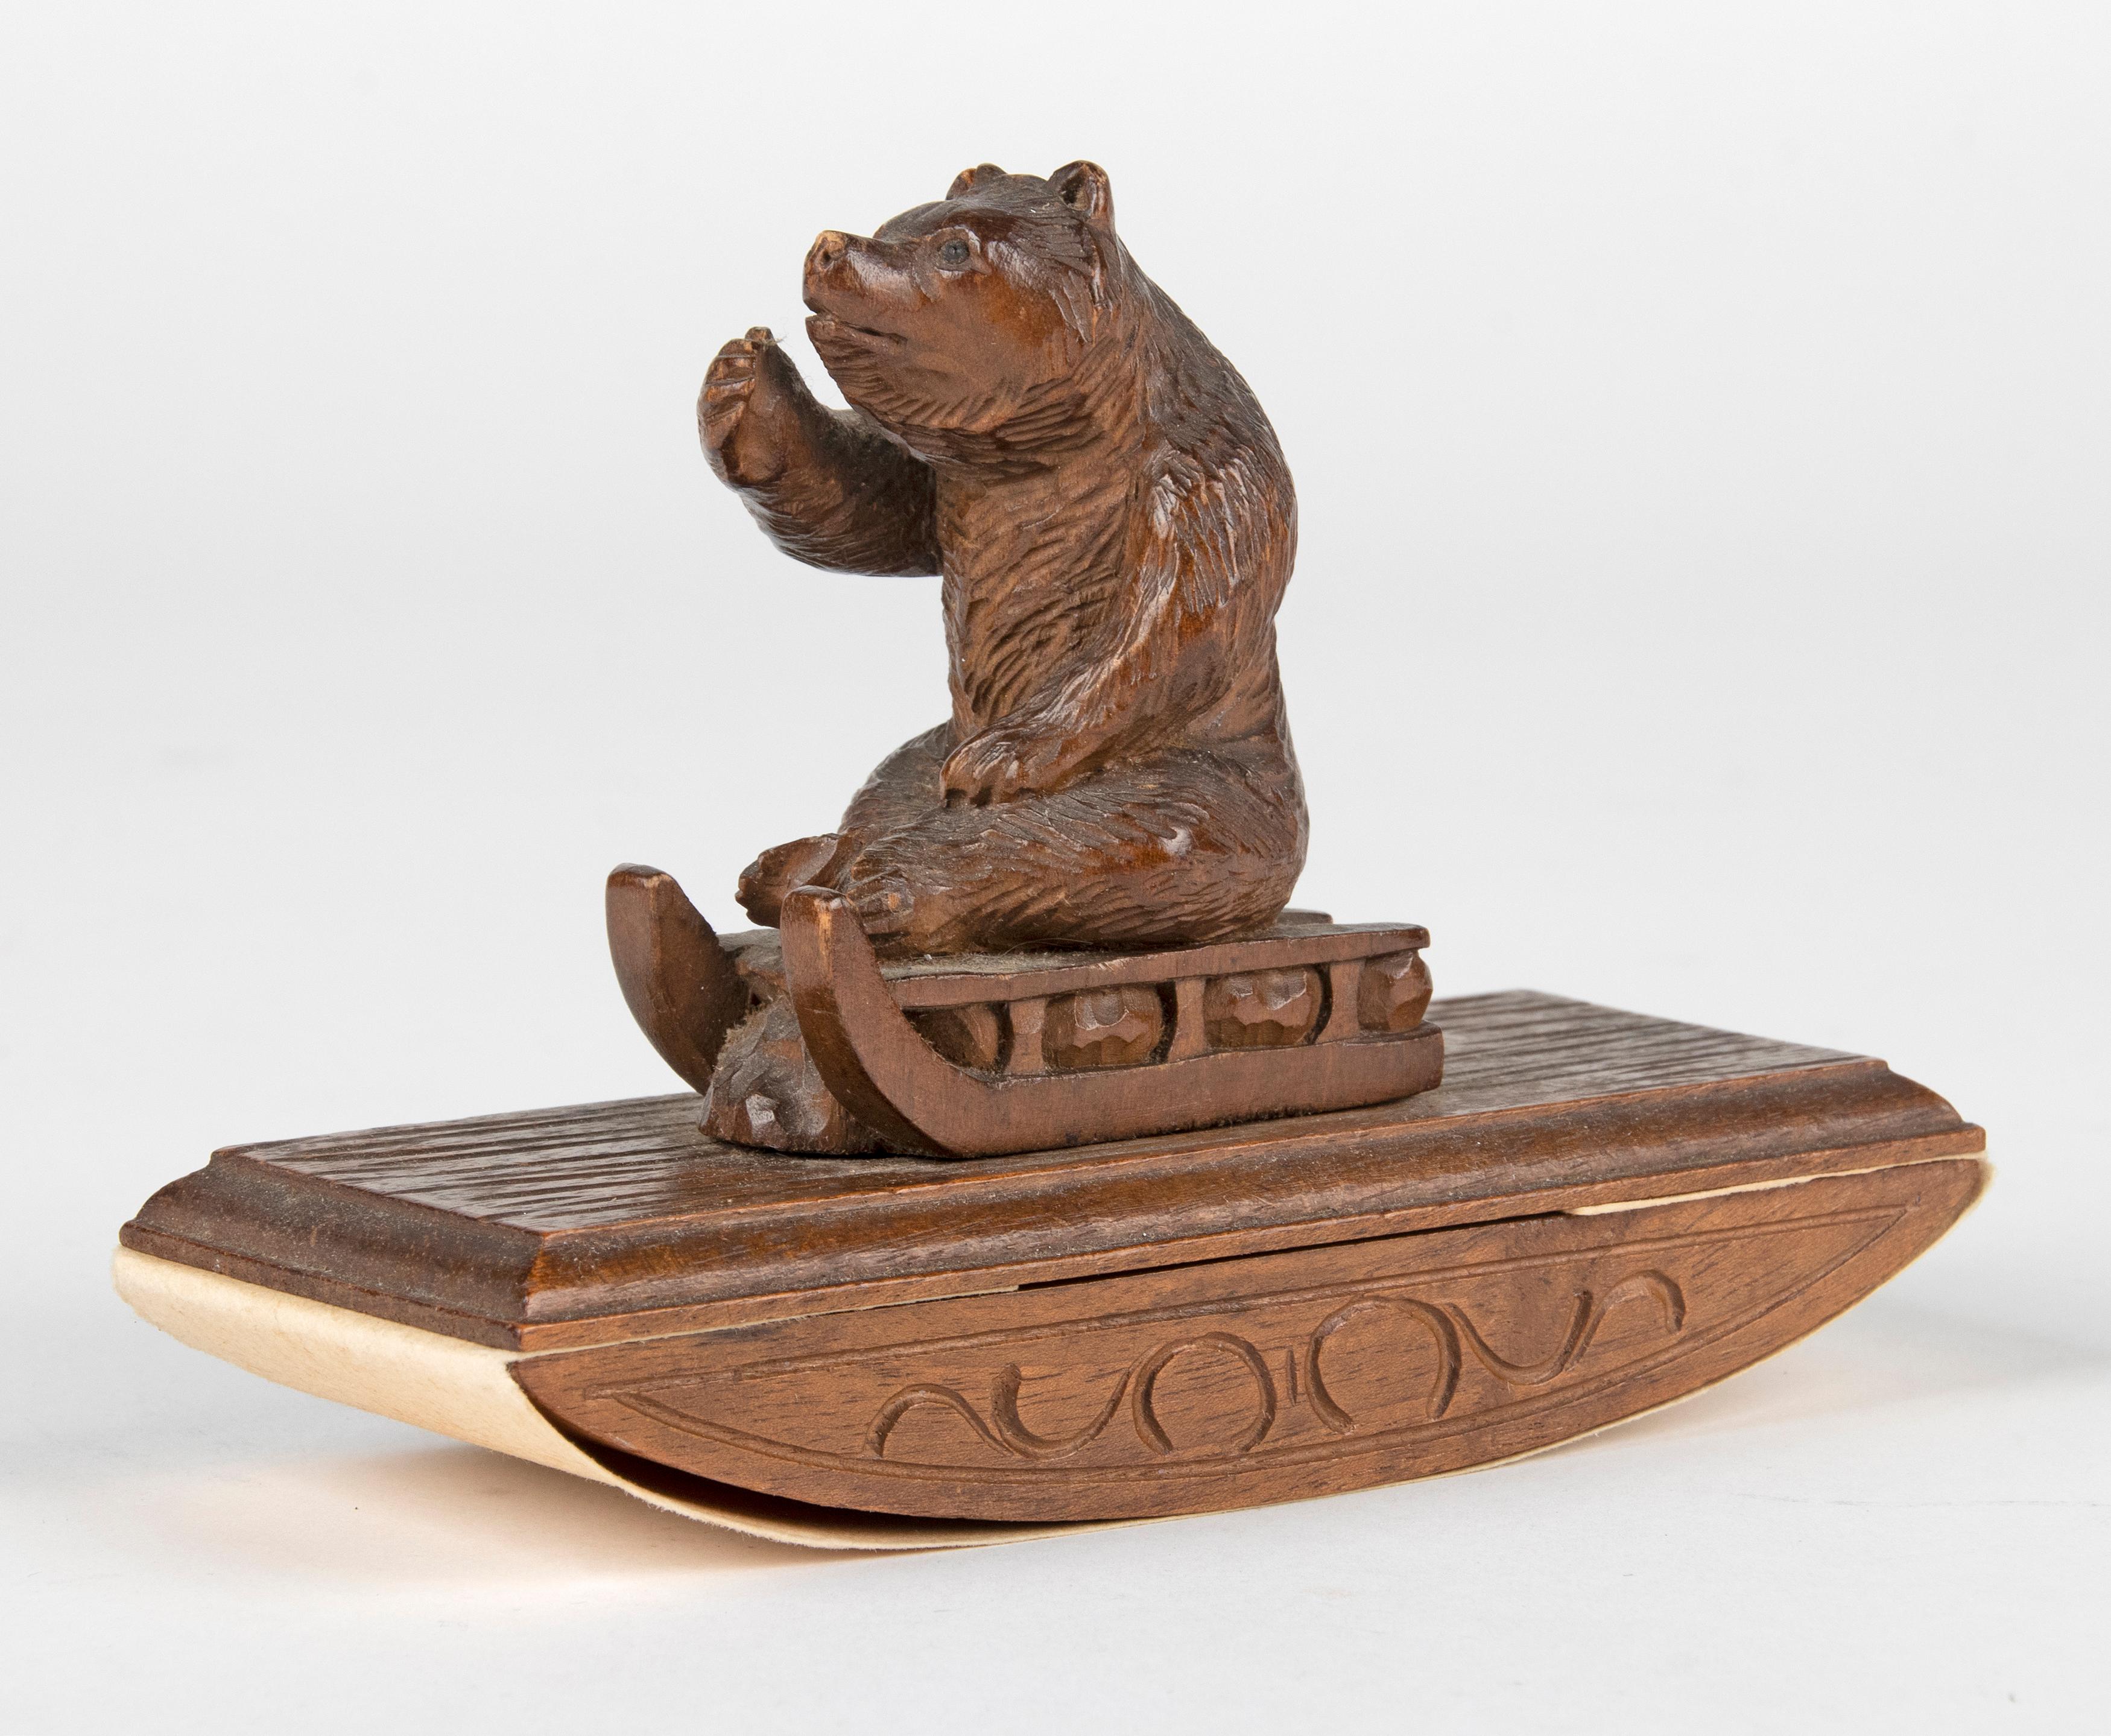 German 19th Century Black Forest Walnut Desk Blotter with a Bear on a Sled